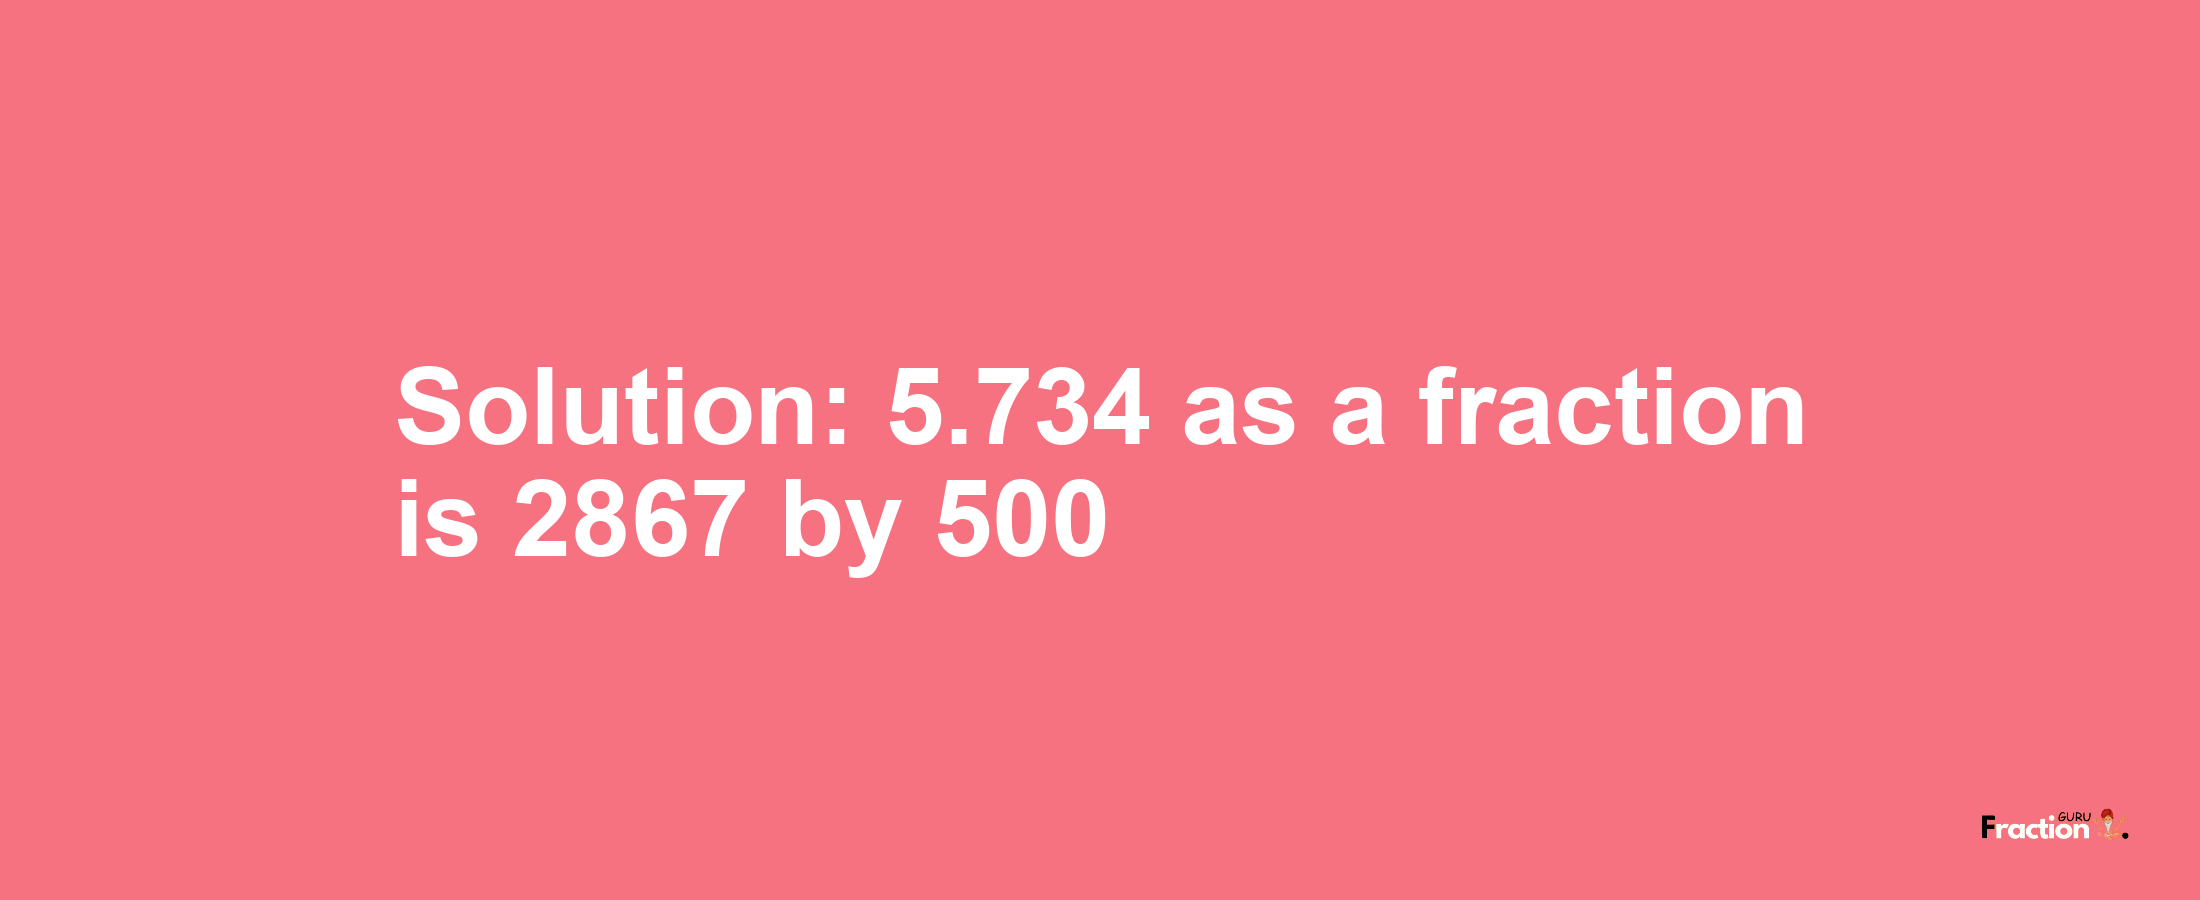 Solution:5.734 as a fraction is 2867/500